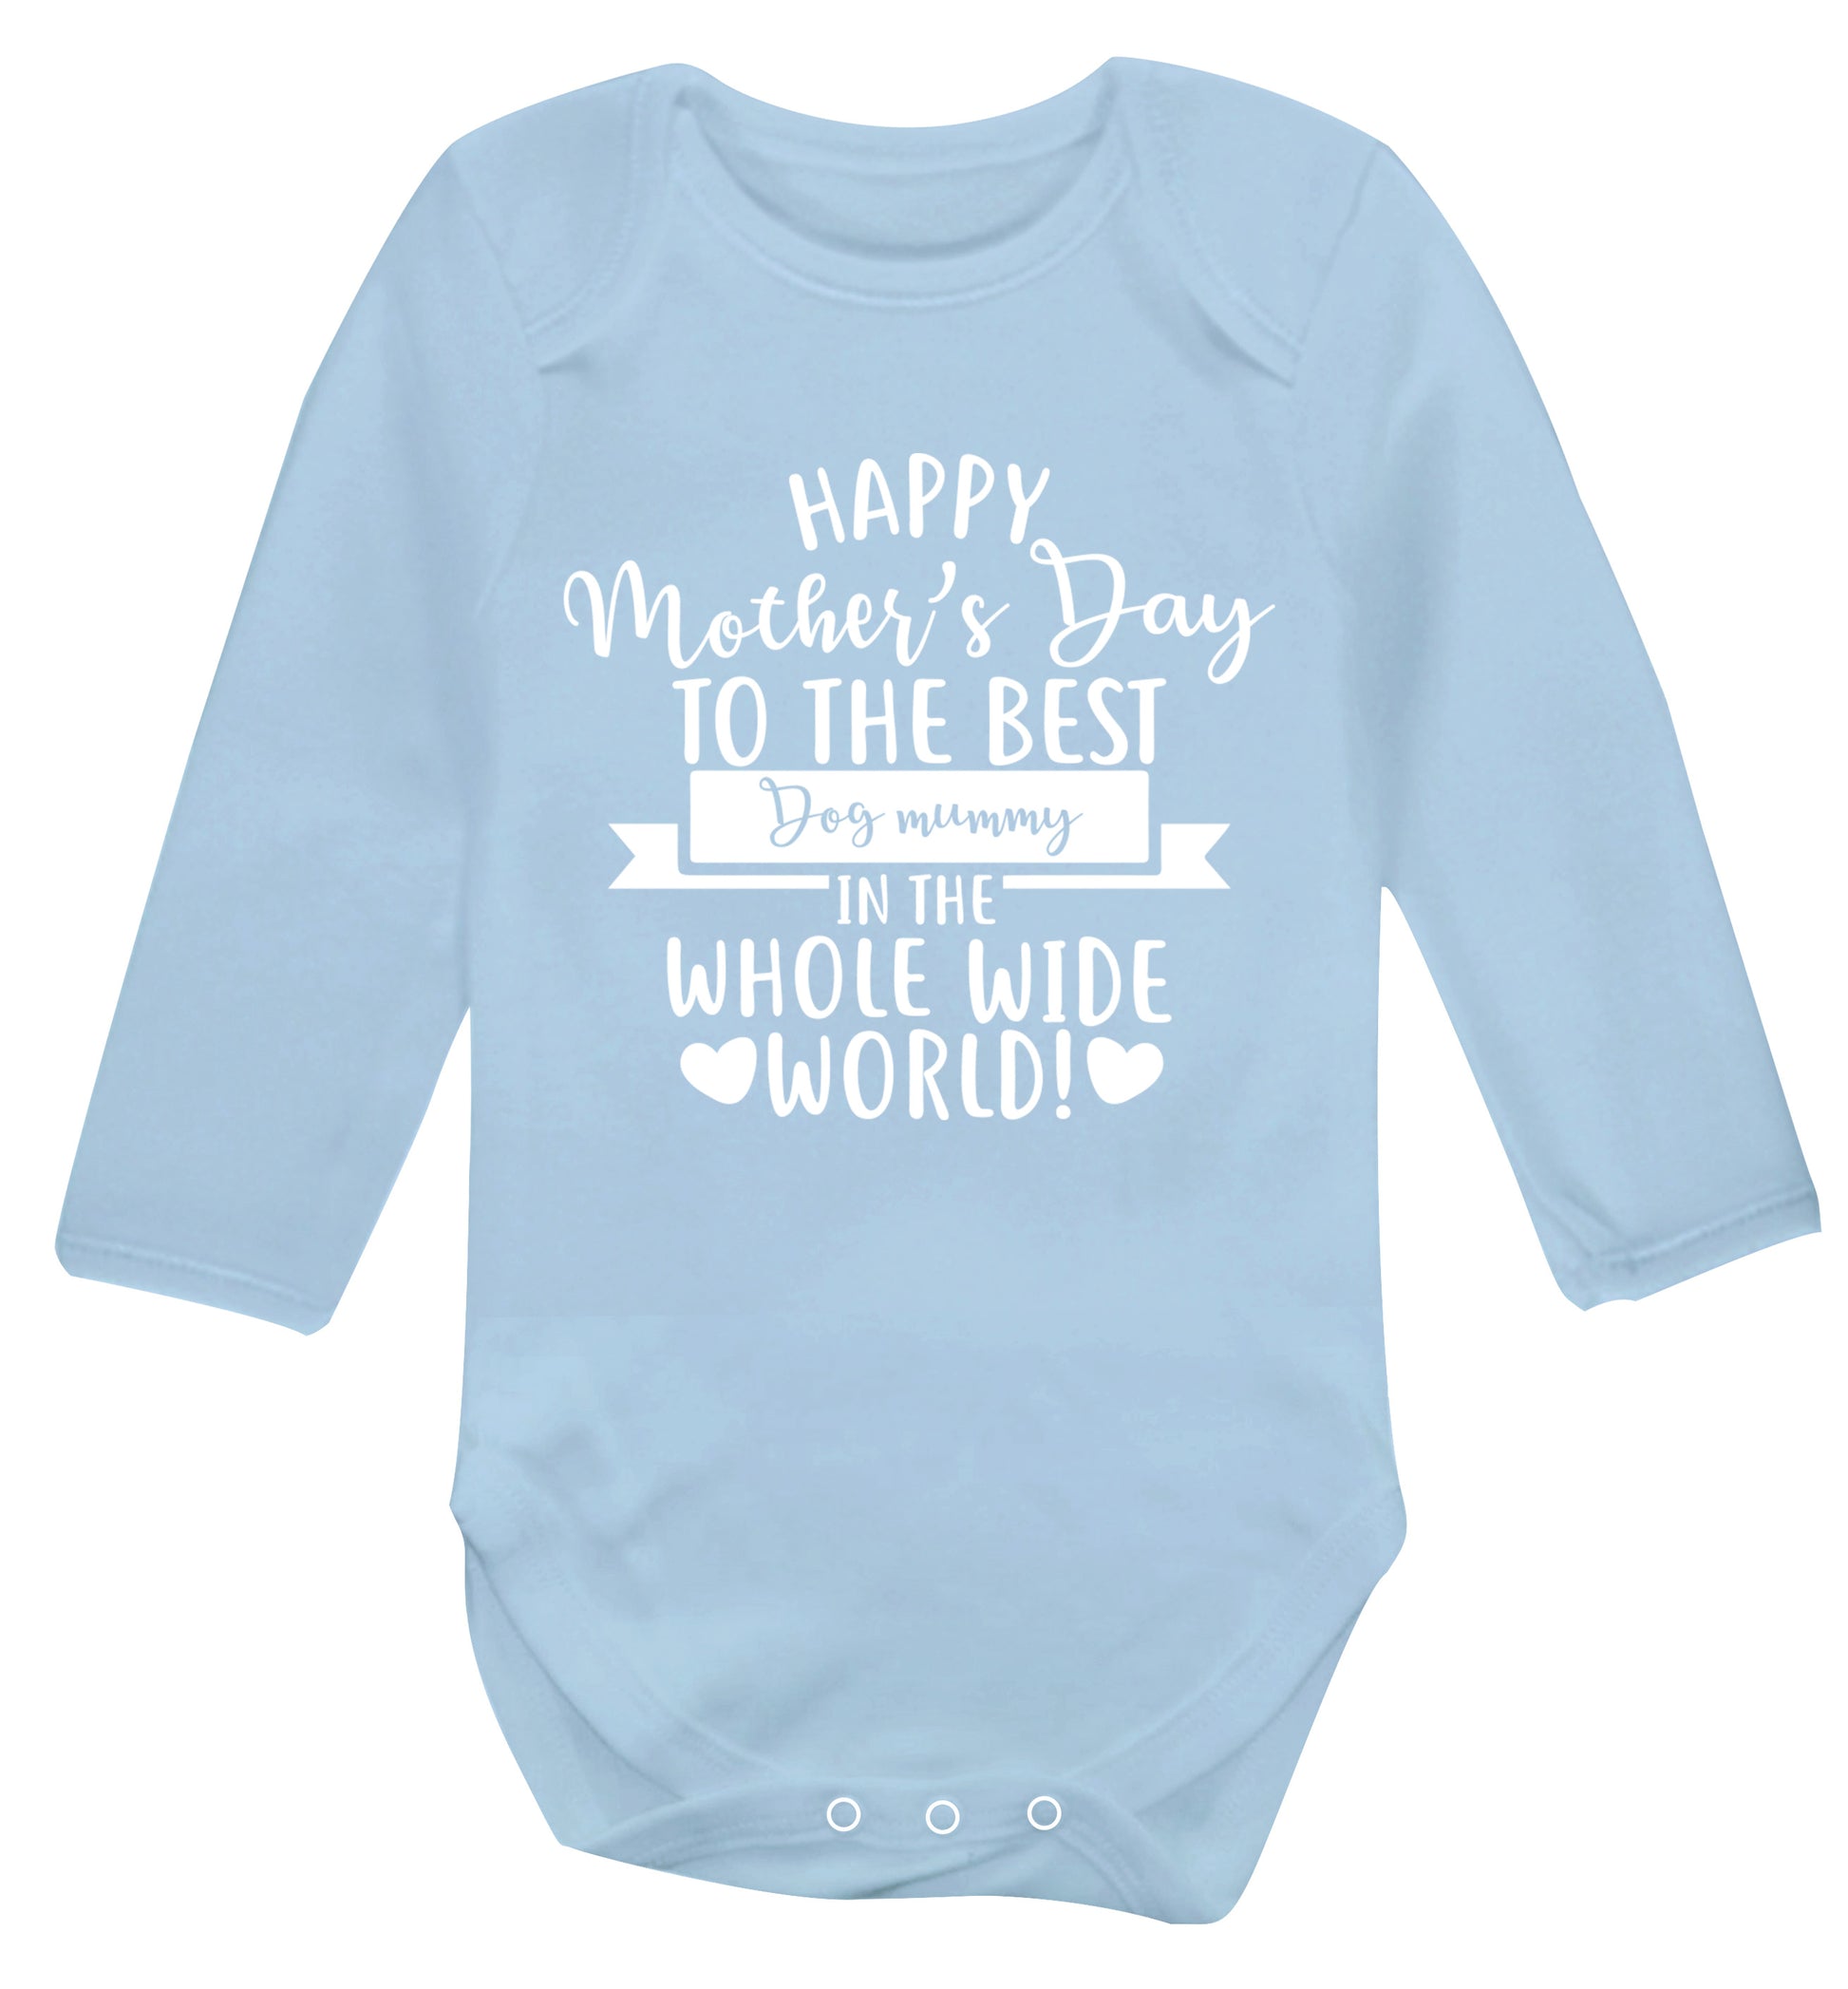 Happy mother's day to the best dog mummy in the world Baby Vest long sleeved pale blue 6-12 months